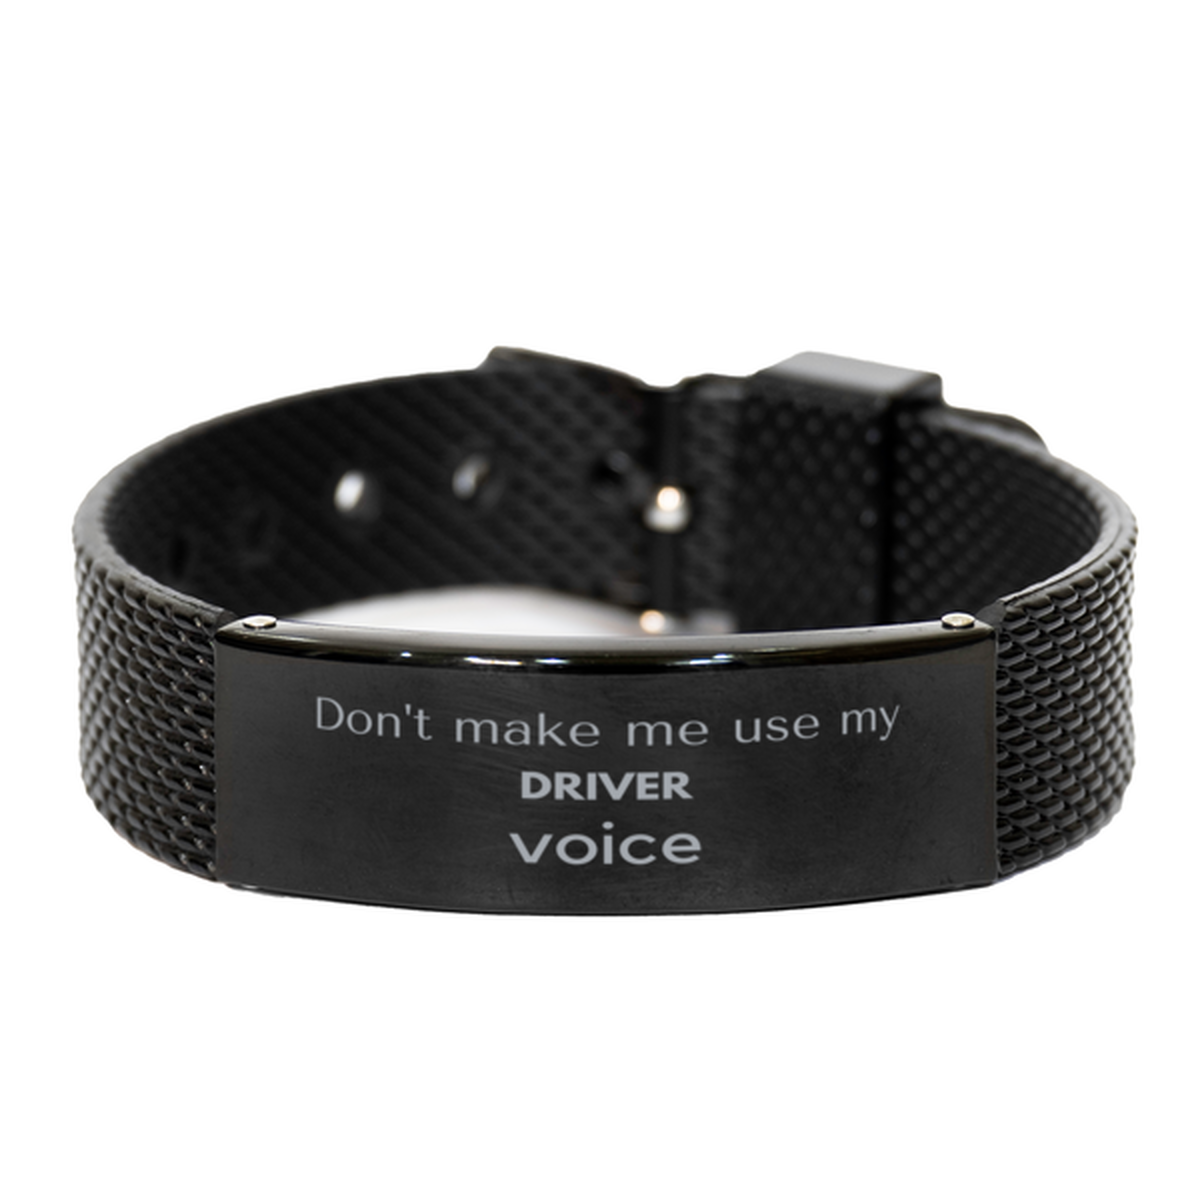 Don't make me use my Driver voice, Sarcasm Driver Gifts, Christmas Driver Black Shark Mesh Bracelet Birthday Unique Gifts For Driver Coworkers, Men, Women, Colleague, Friends